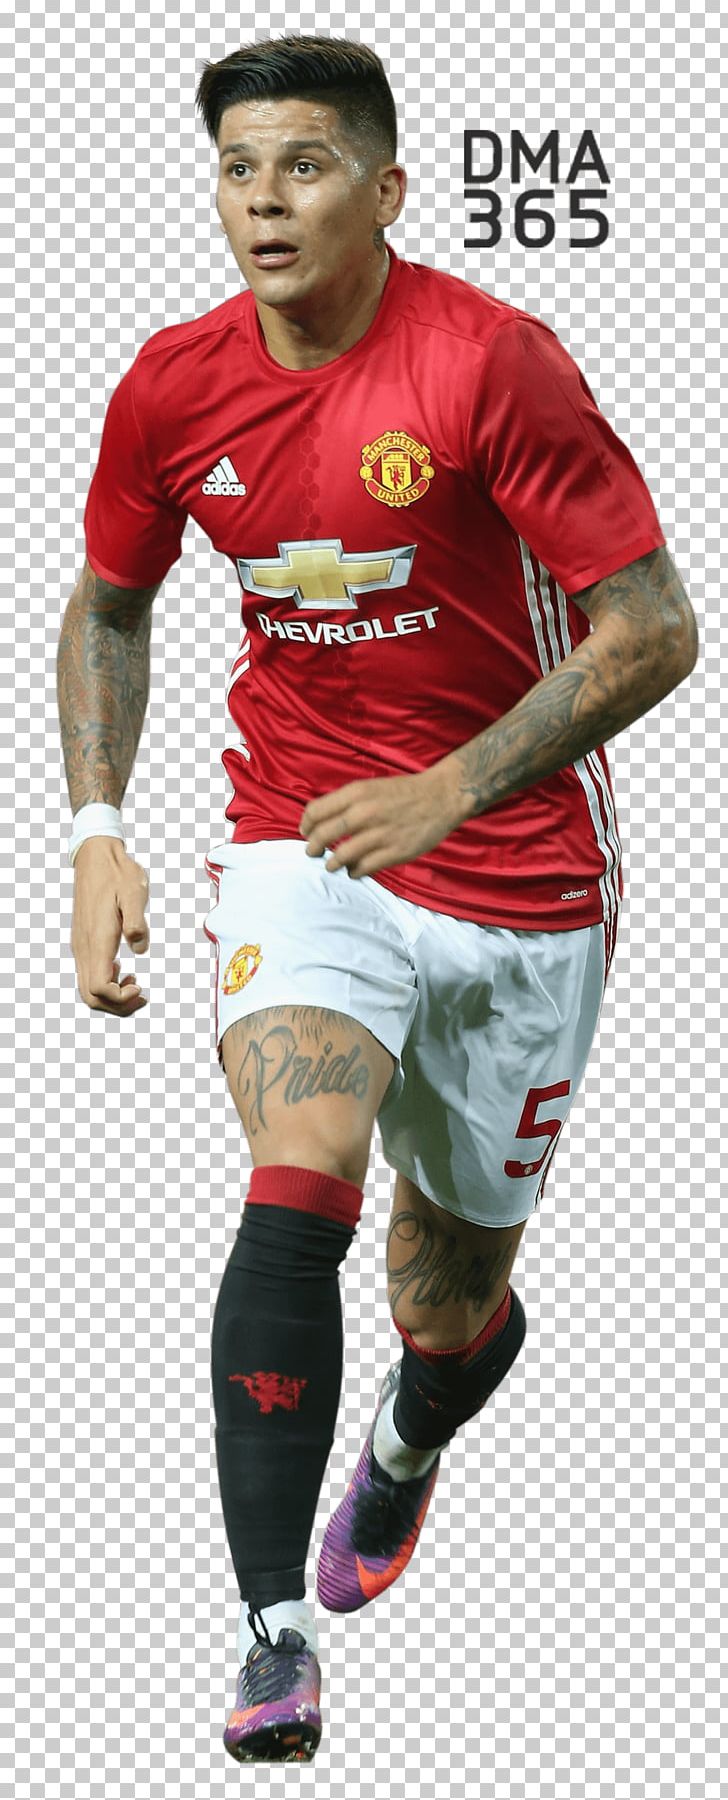 Marcos Rojo Manchester United F.C. Argentina National Football Team Jersey Football Player PNG, Clipart, 2017, 2018, April, Argentina National Football Team, Desktop Wallpaper Free PNG Download